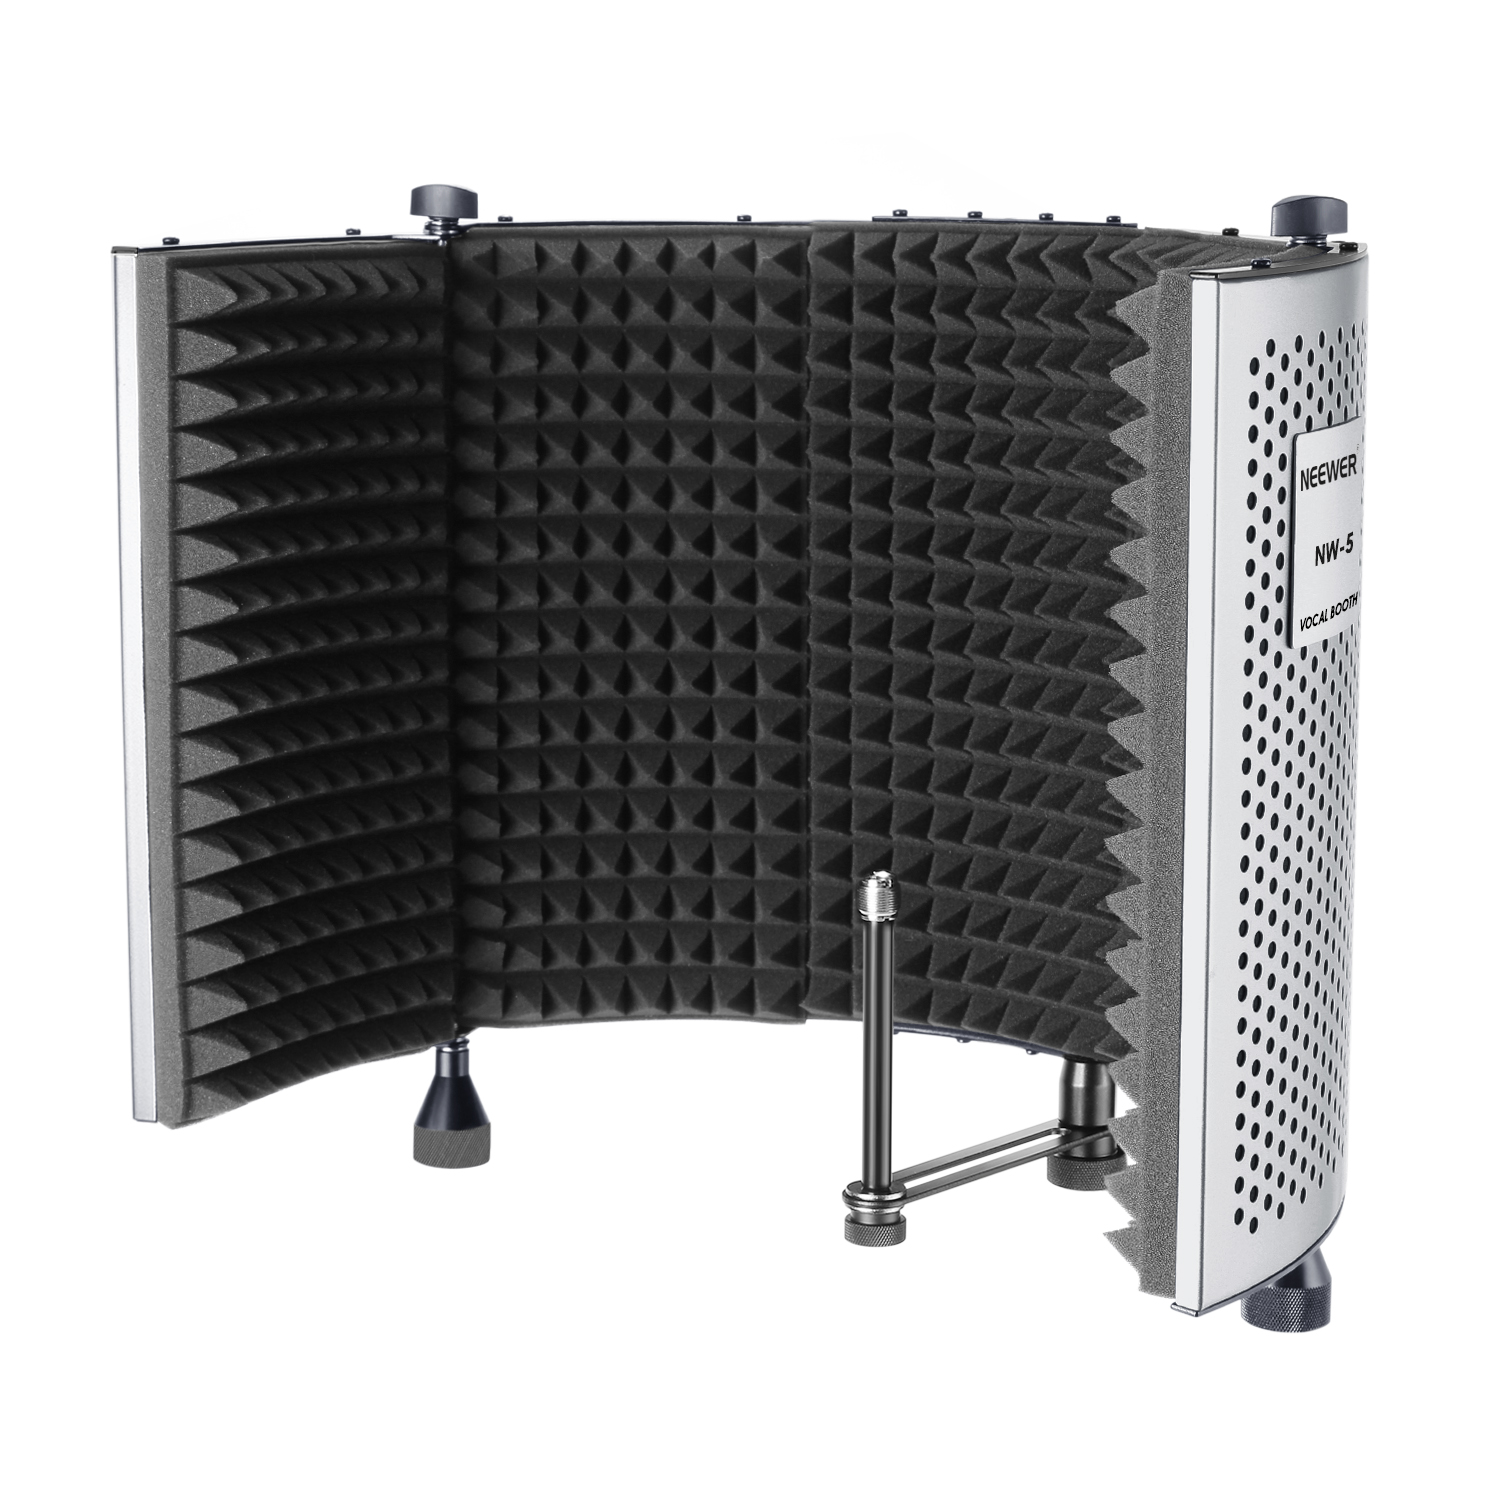 Neewer NW-5 Foldable Sound Absorbing Acoustic Isolation Microphone